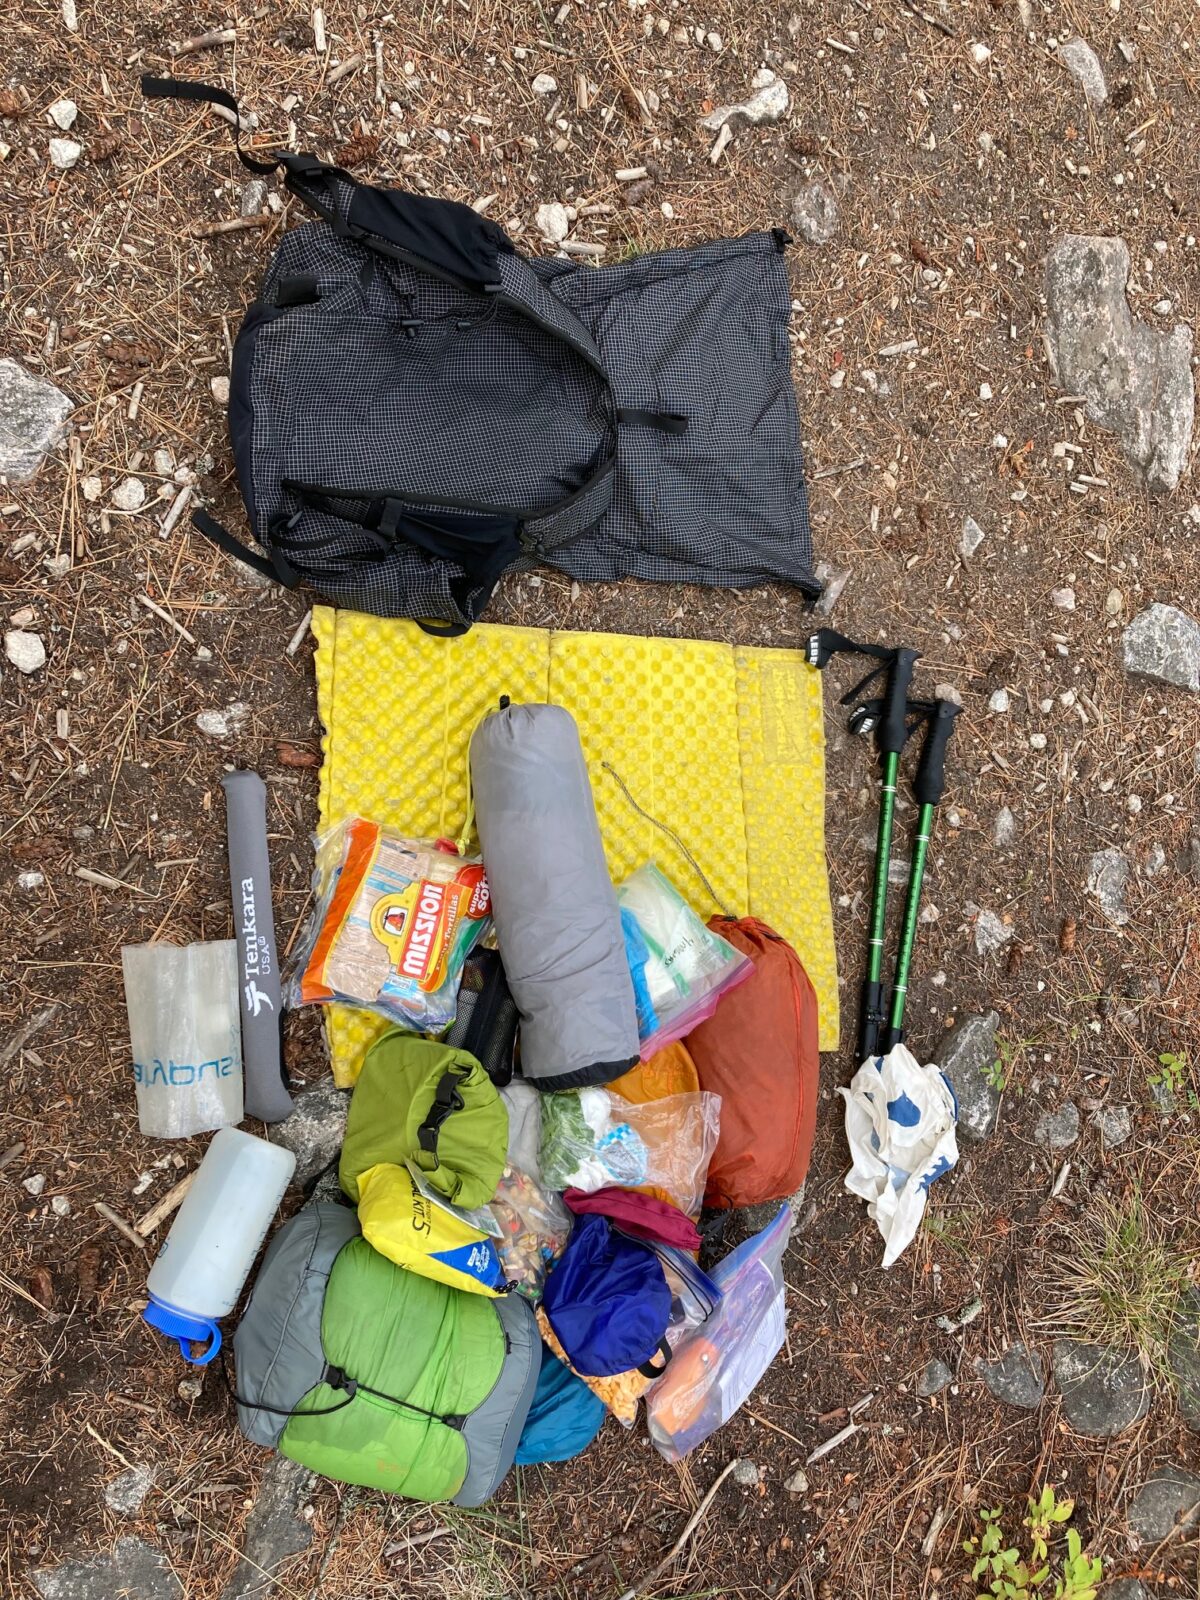 Fishing pole for backpacking : r/CampingGear